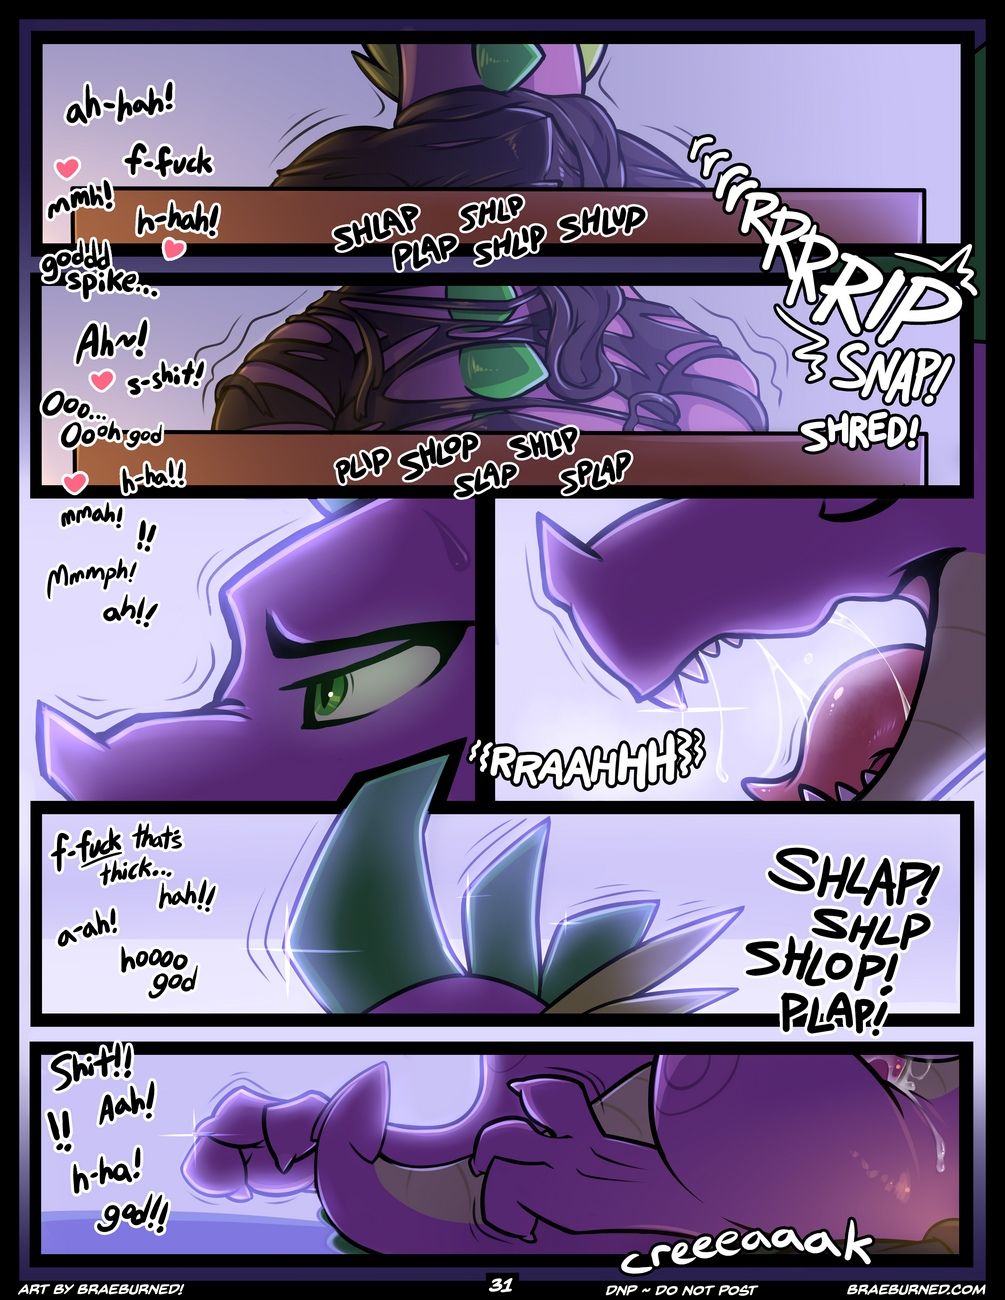 Comic verlichting 2 page 1